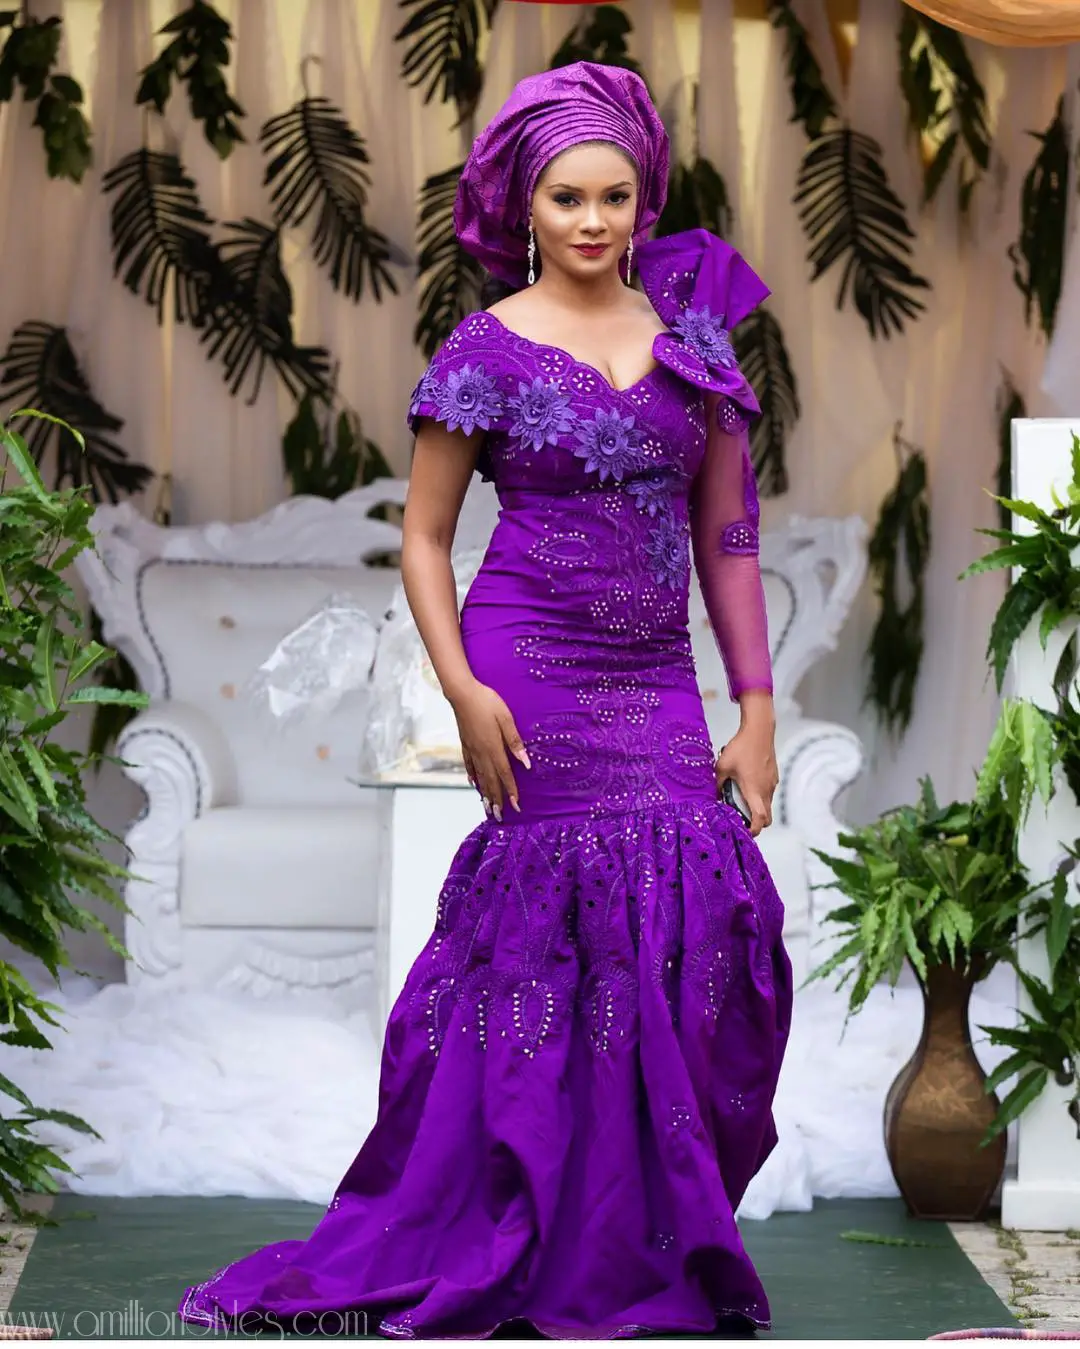 Our Breaths Caught At The Sight Of These Scintillating Lace Asoebi Styles